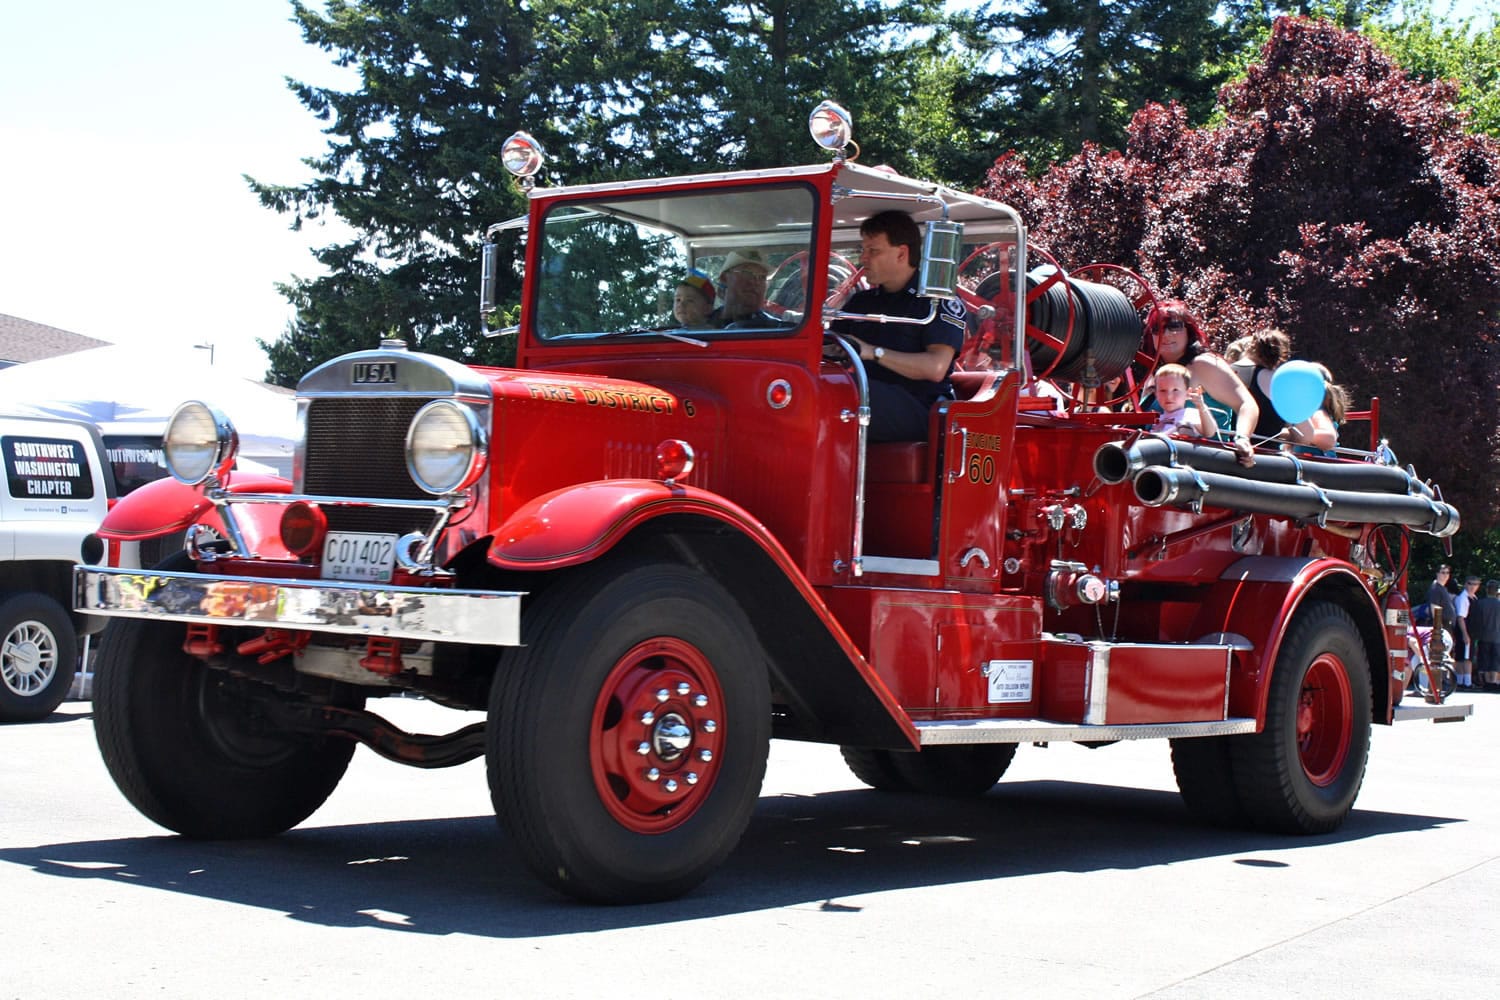 Members of Clark County Fire District 6 gave children rides in a 1940-model Halobird fire engine as part of their Saturday open house.